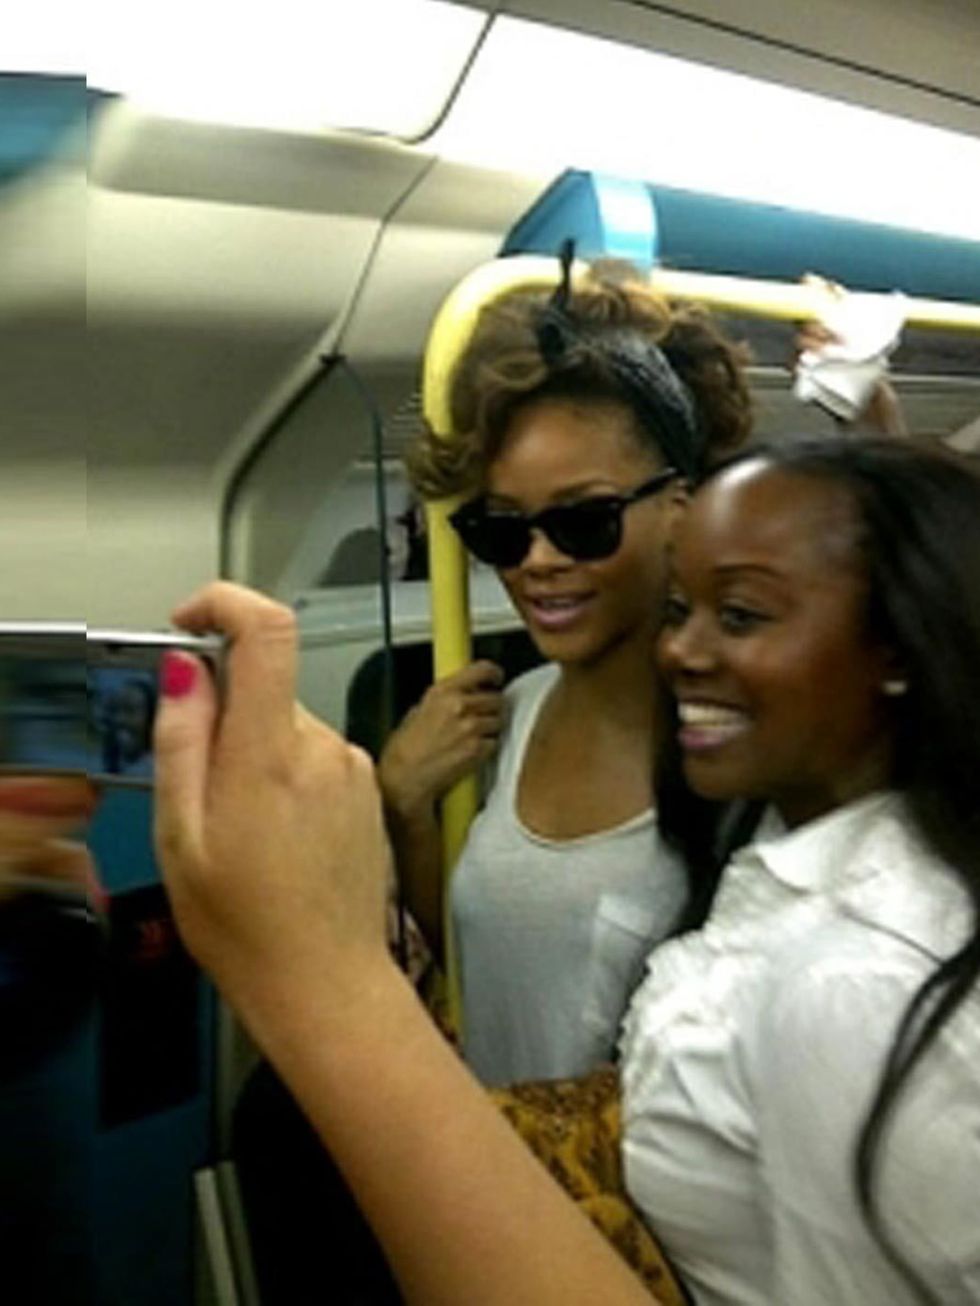 <p><strong>RIHANNA</strong></p><p>This one's no big stretch: <a href="http://www.elleuk.com/elle-tv/cover-stars/elle-magazine/rihanna-elle-behind-the-cover-video">Rihanna</a> regularly takes the Tube when she's gigging at the O2. Memorise the route now.</